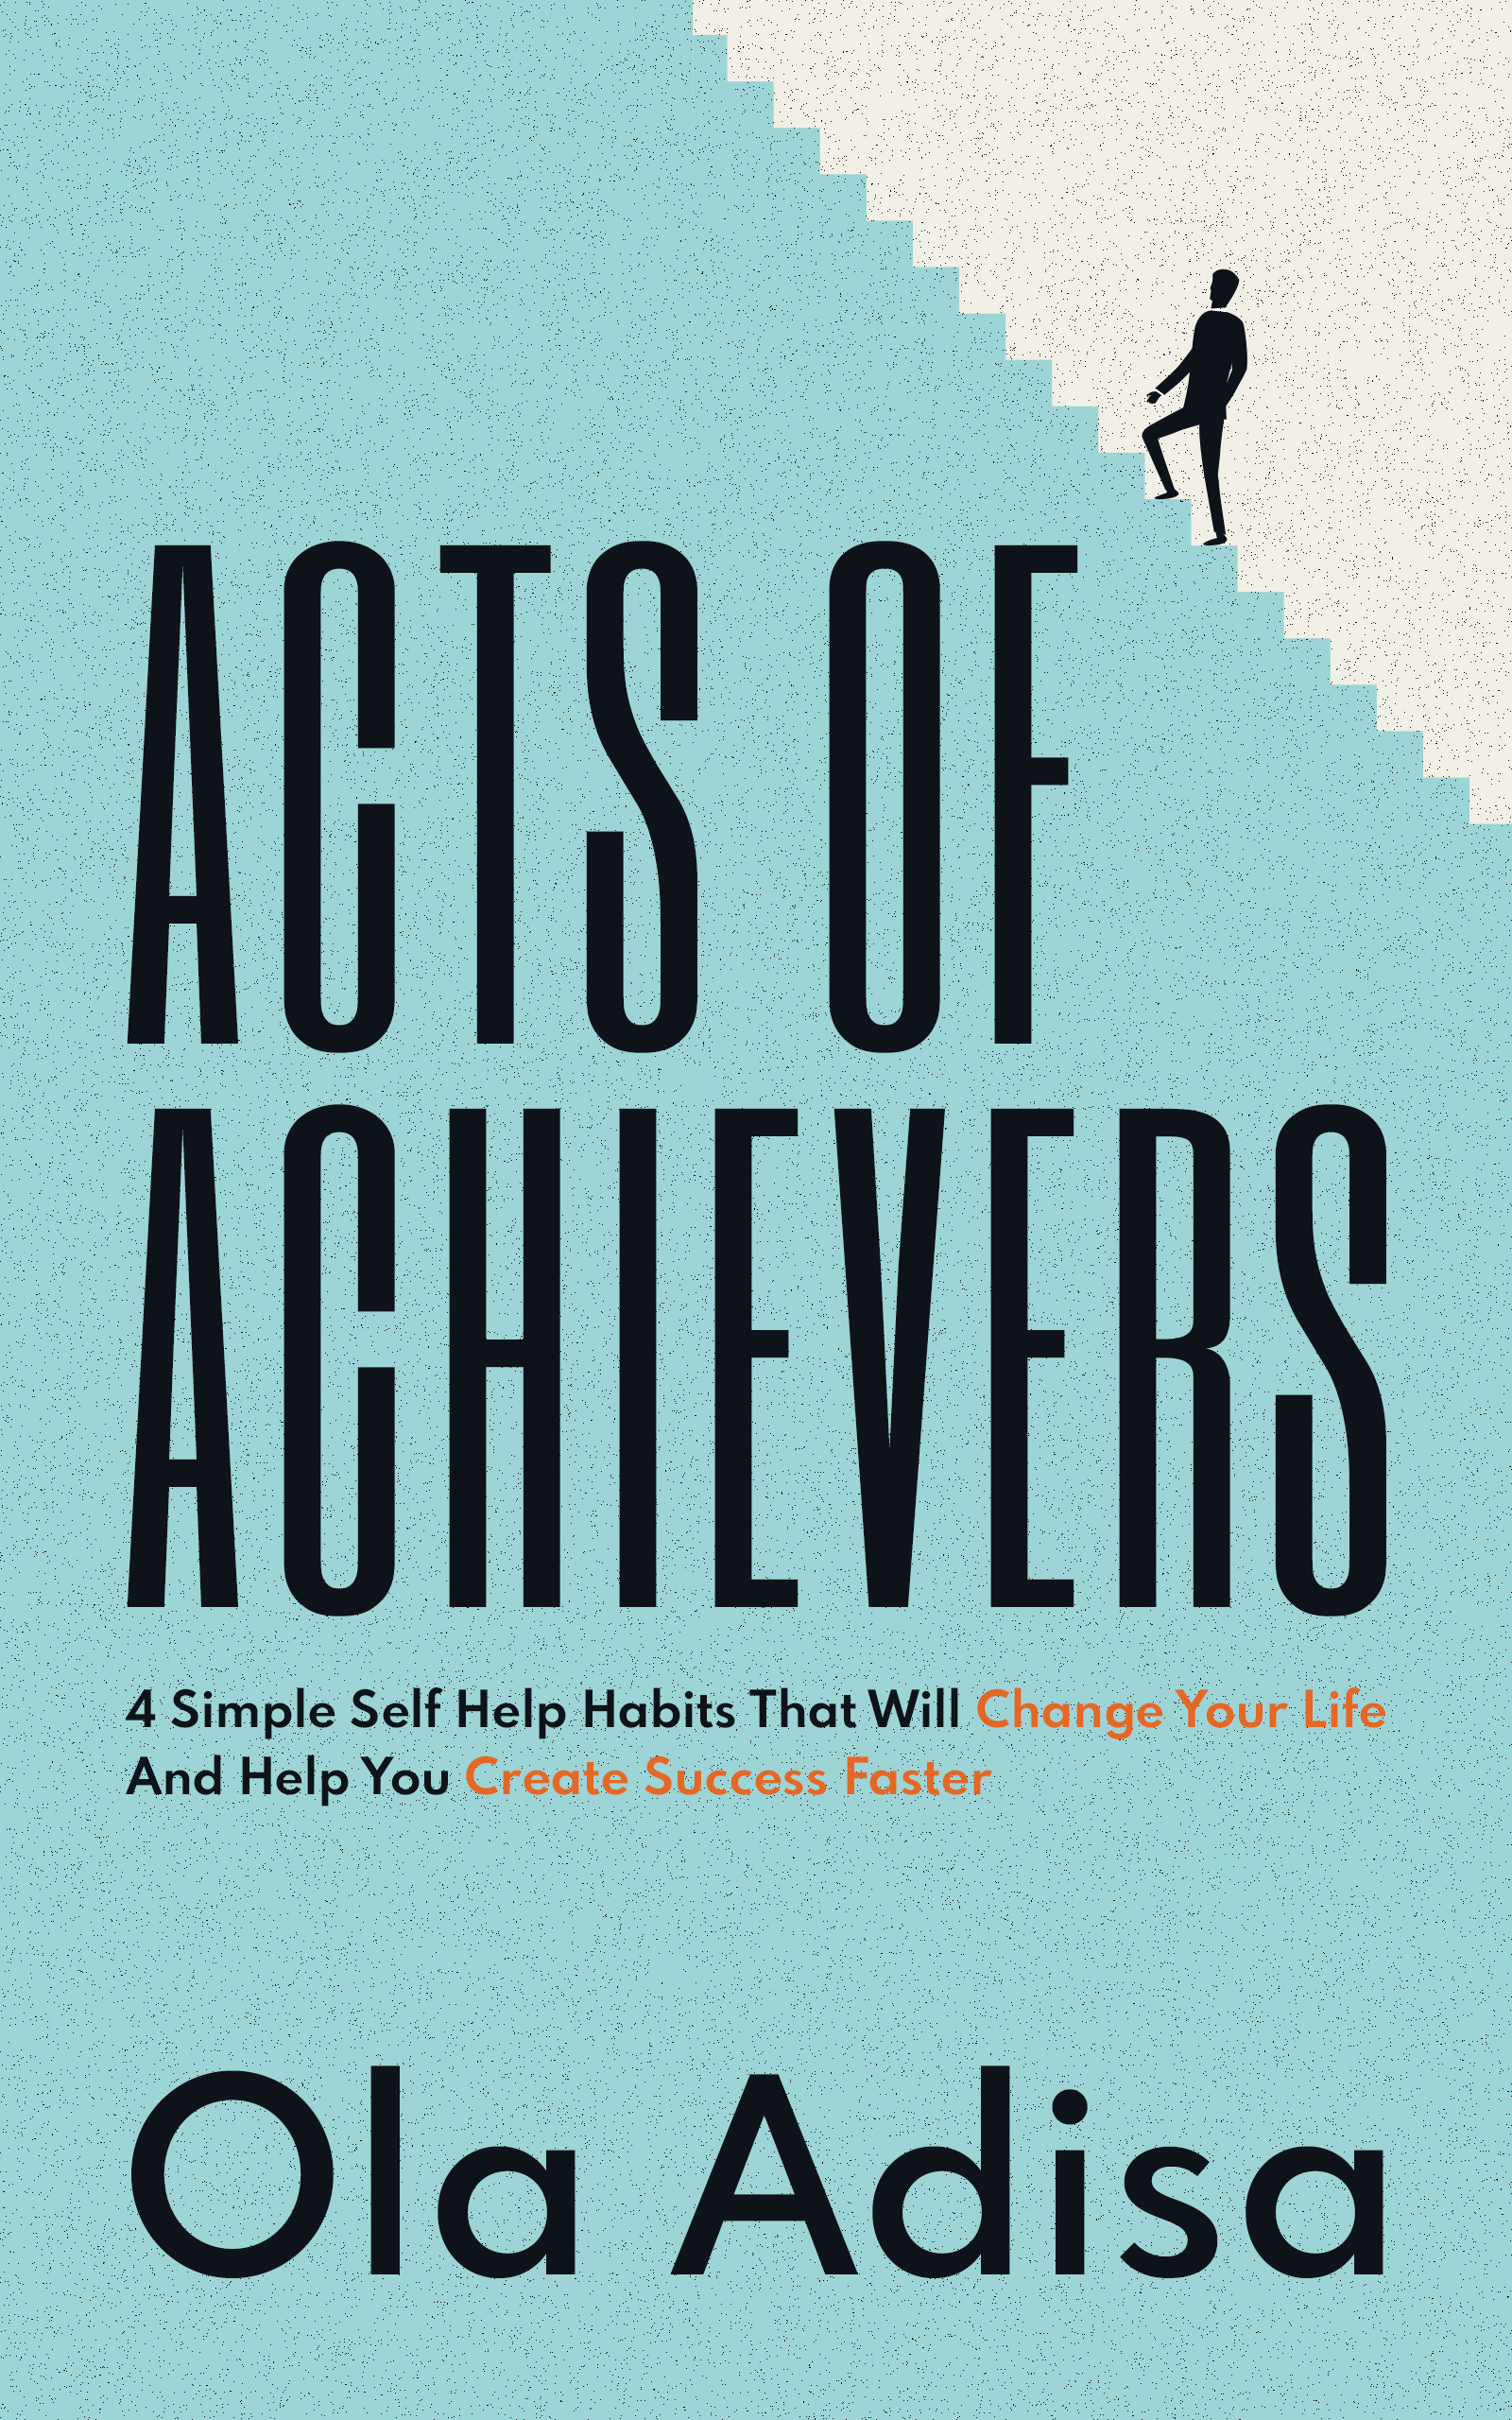 Author Ola Adisa’s Book "Acts of Achievers" Is Now Available On Amazon